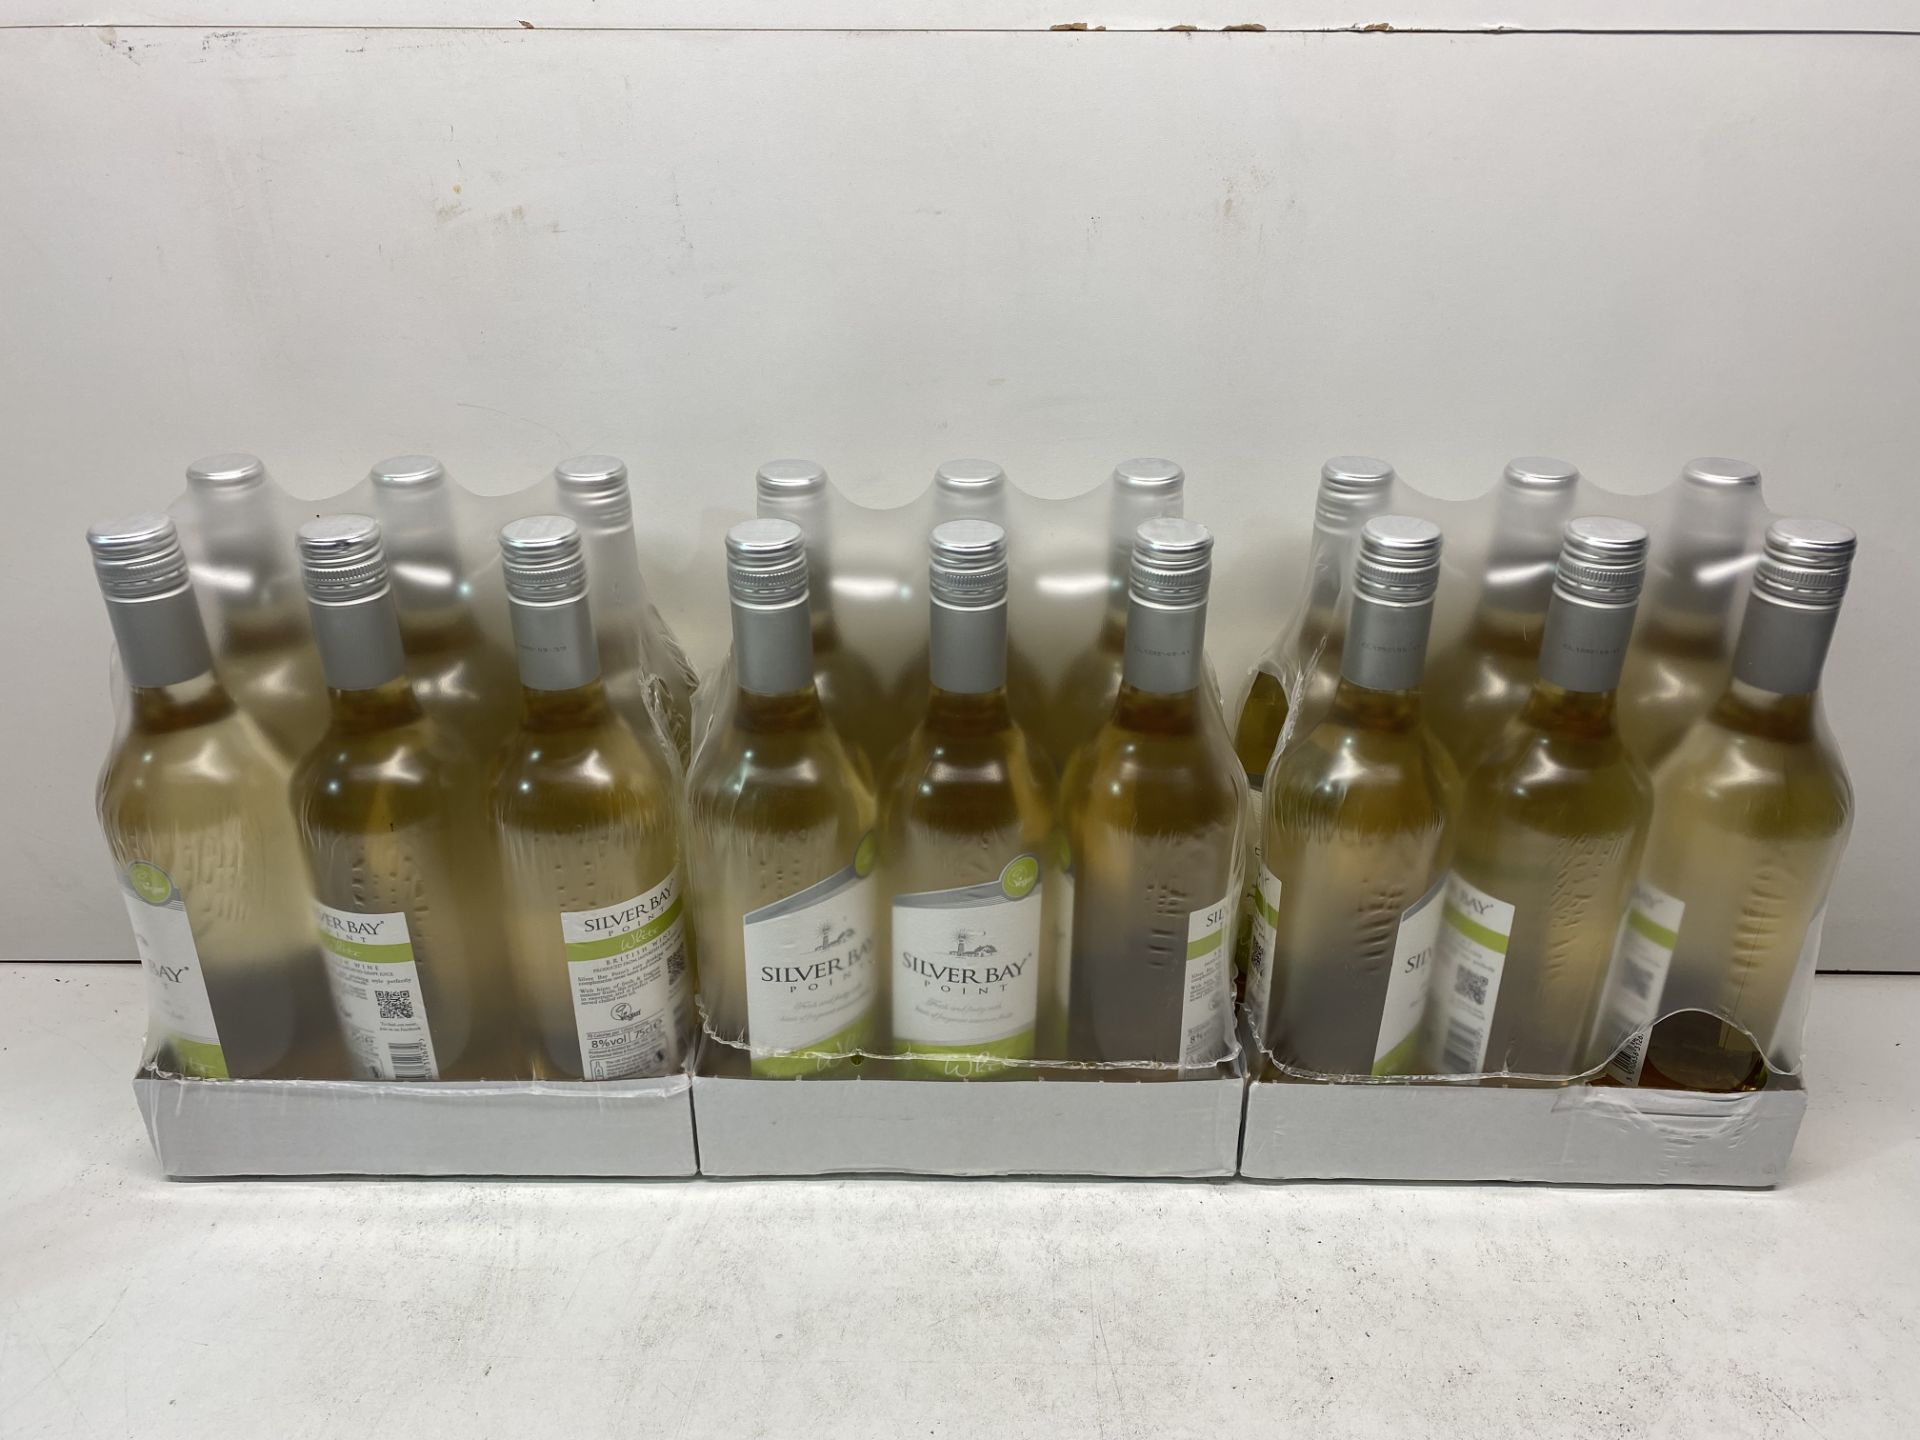 18 x Bottles Of Silver Bay Point White Wine